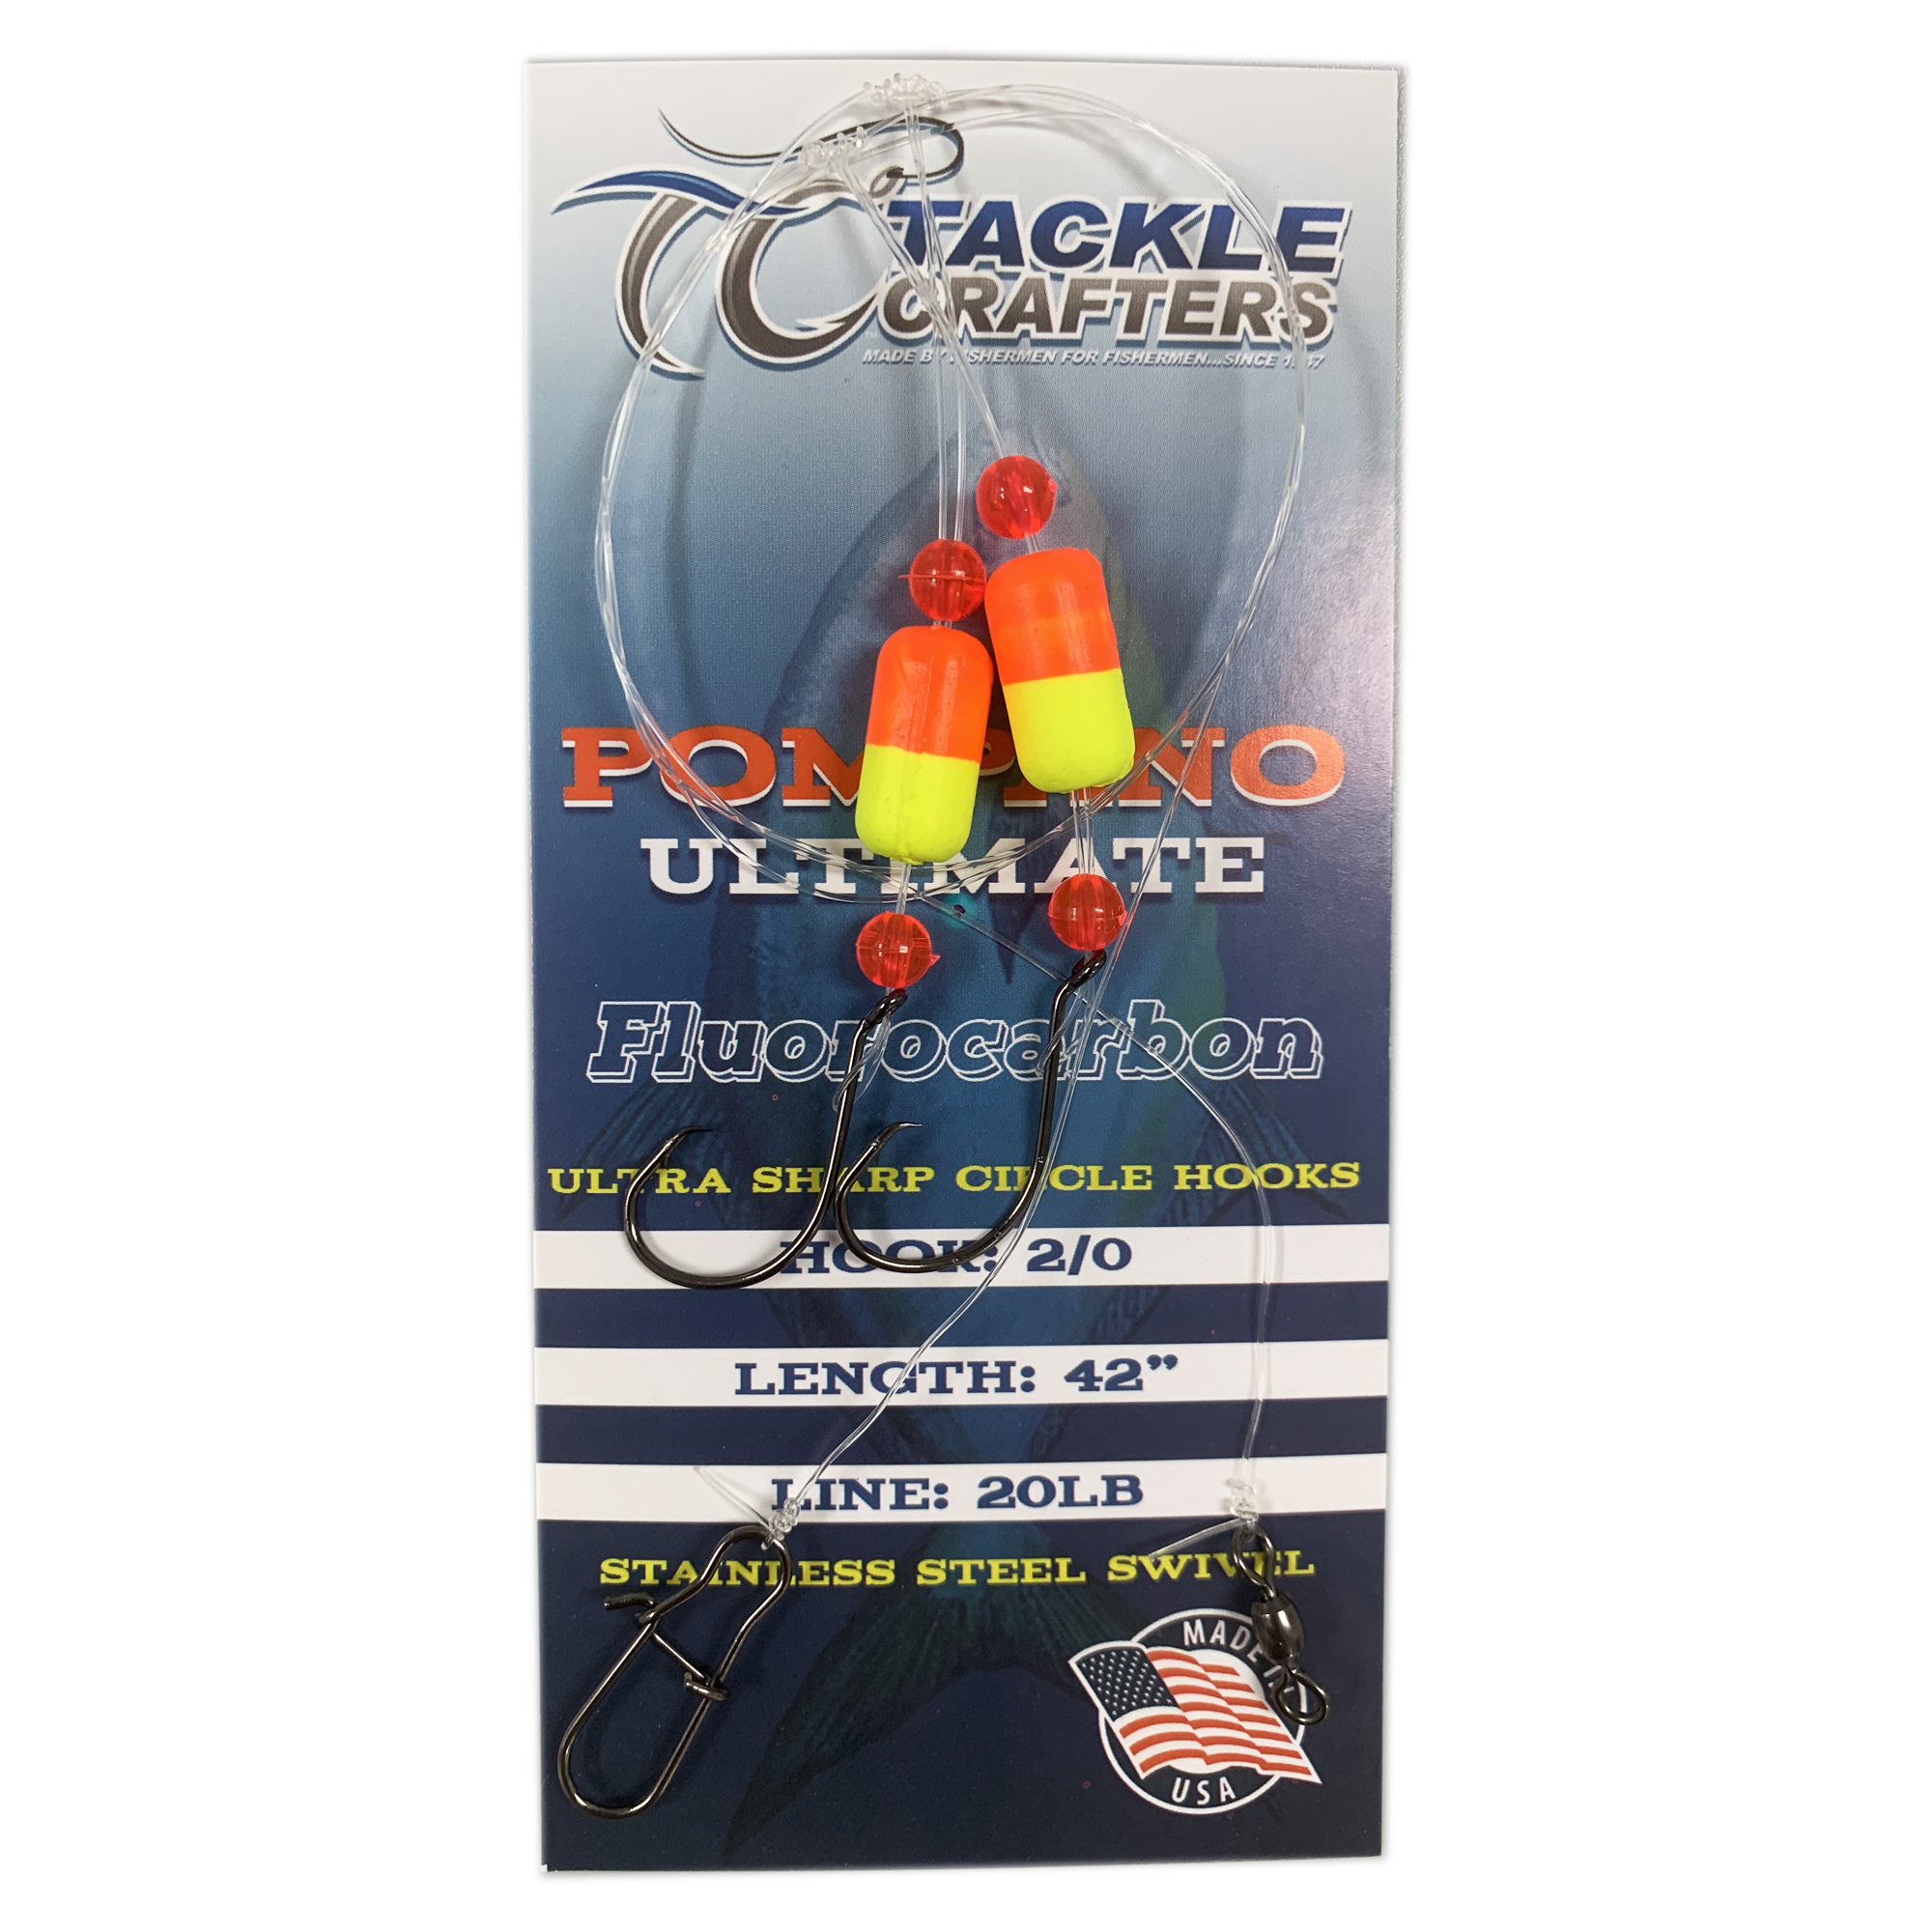 Tackles Crafters Pompano Elite